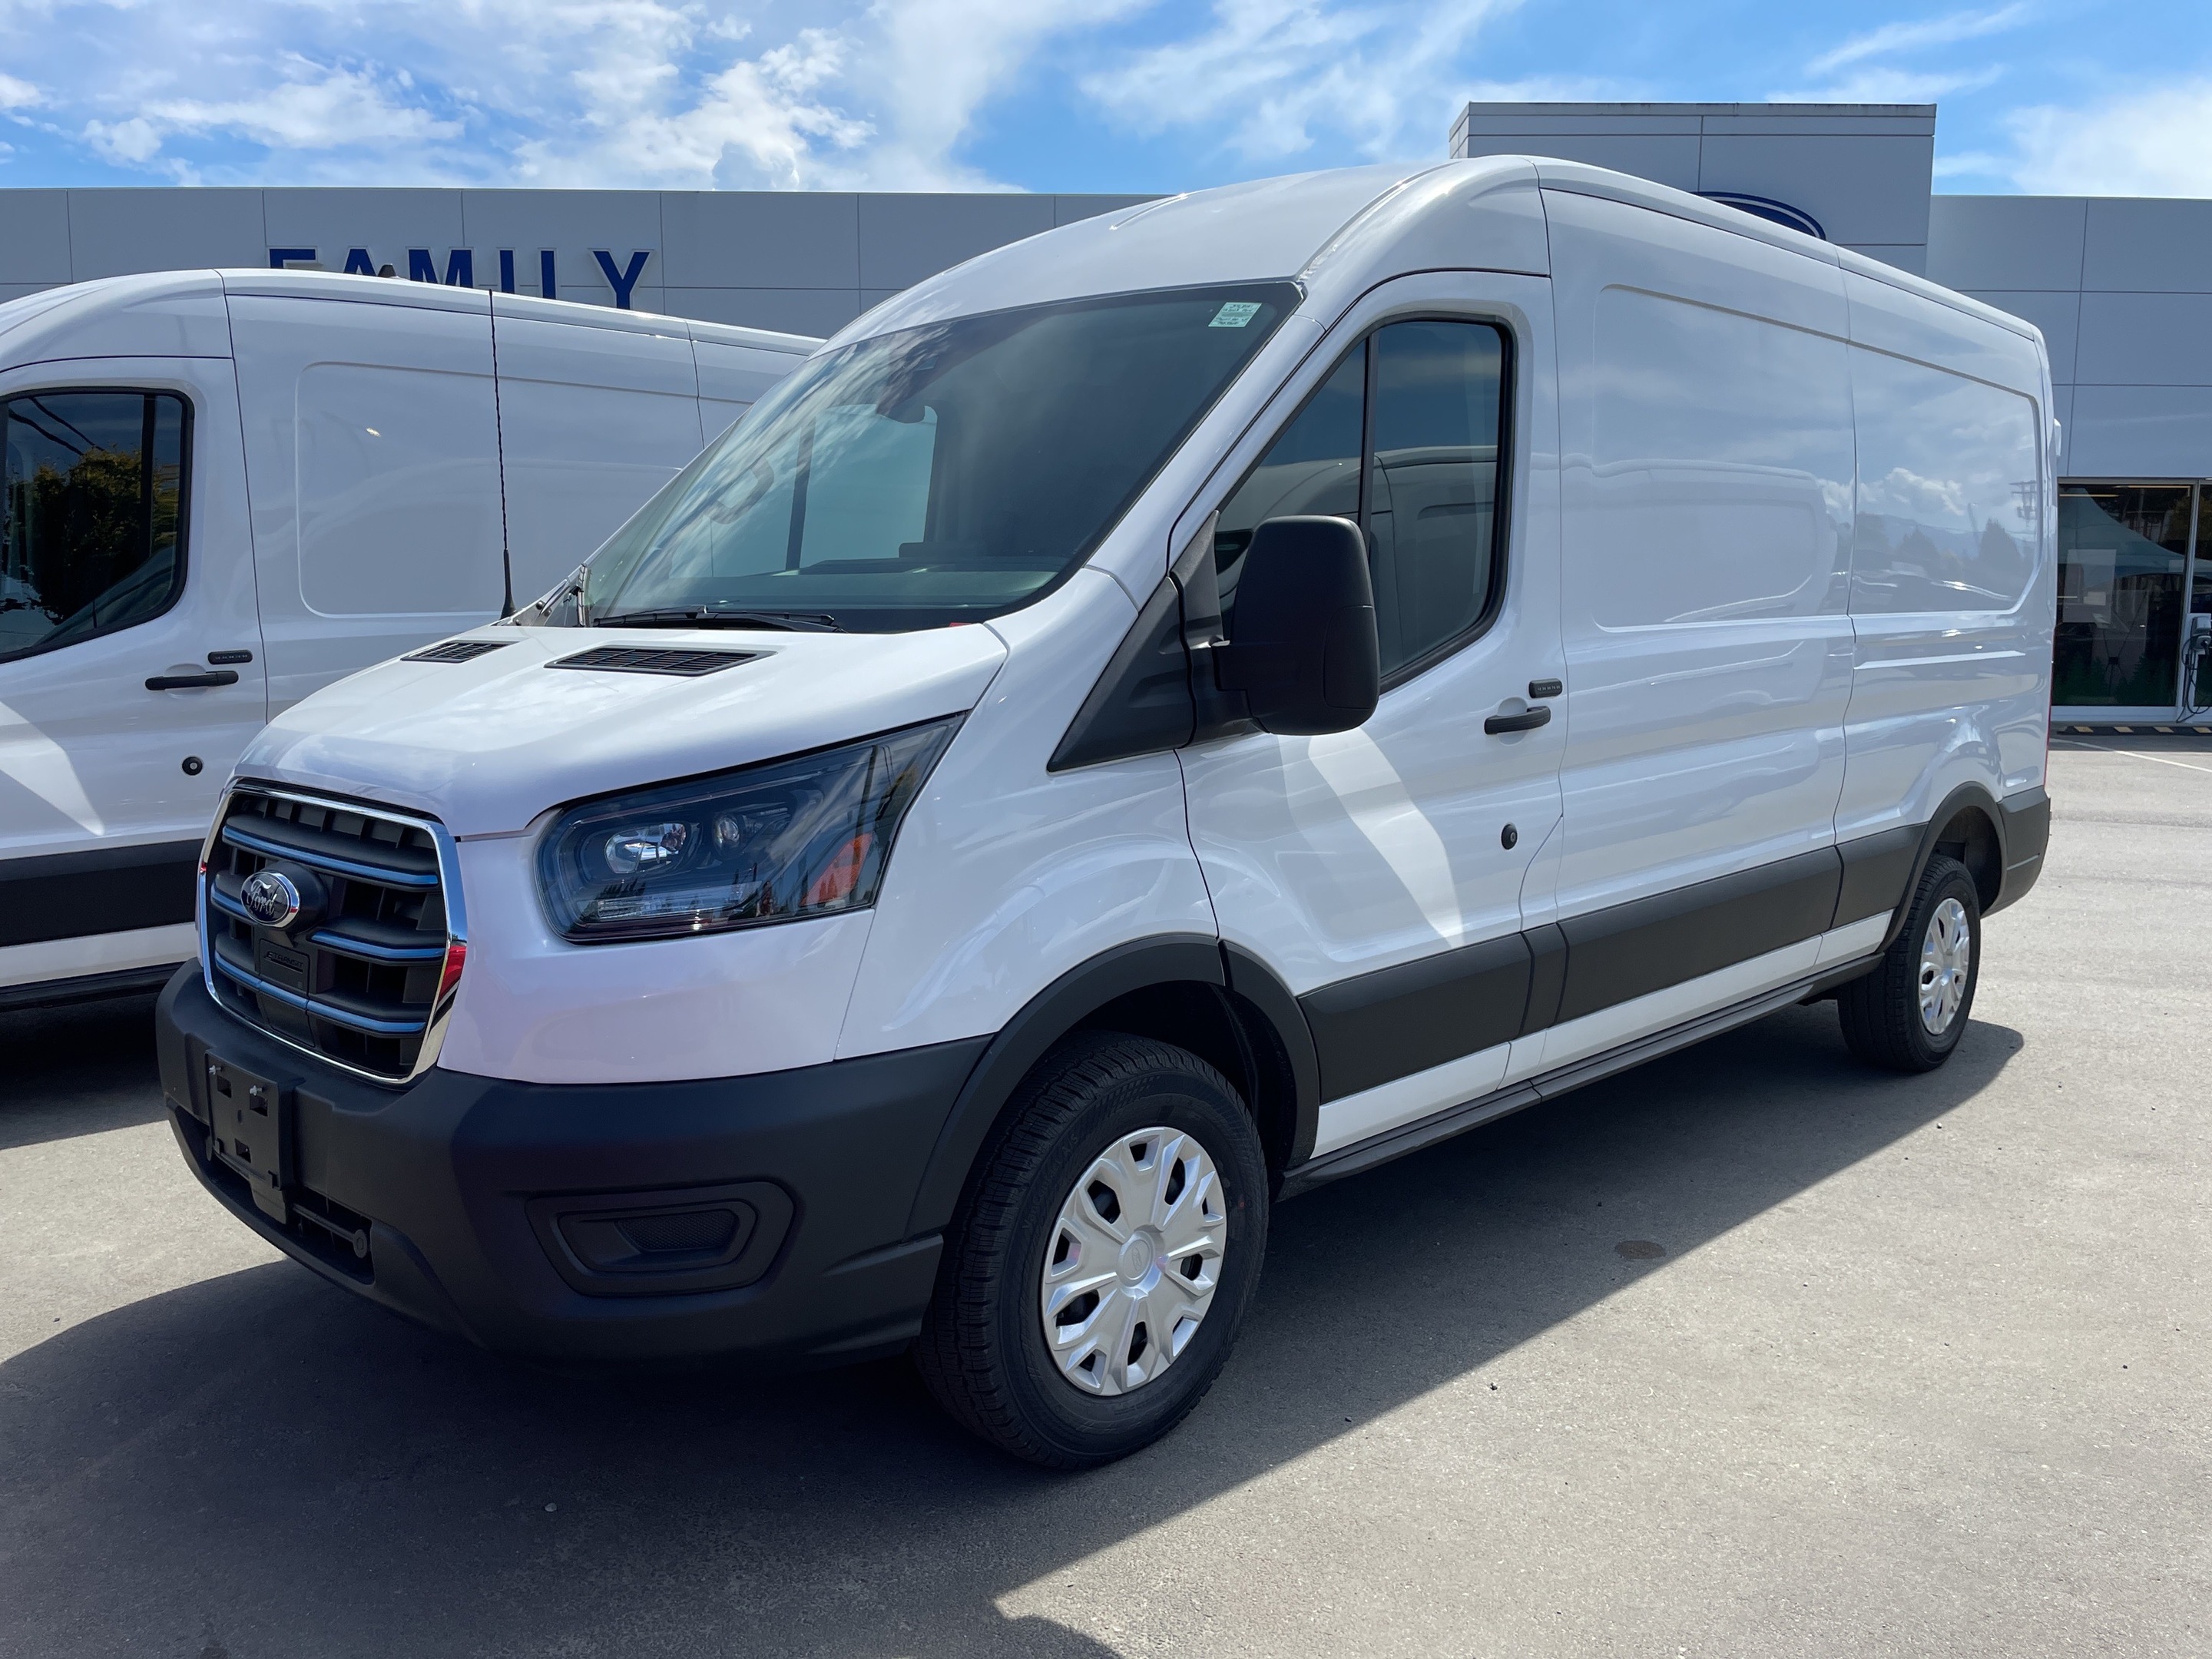 2023 Ford E-Transit Cargo Van $17,500.00 off! Ask about extra Government Rebates